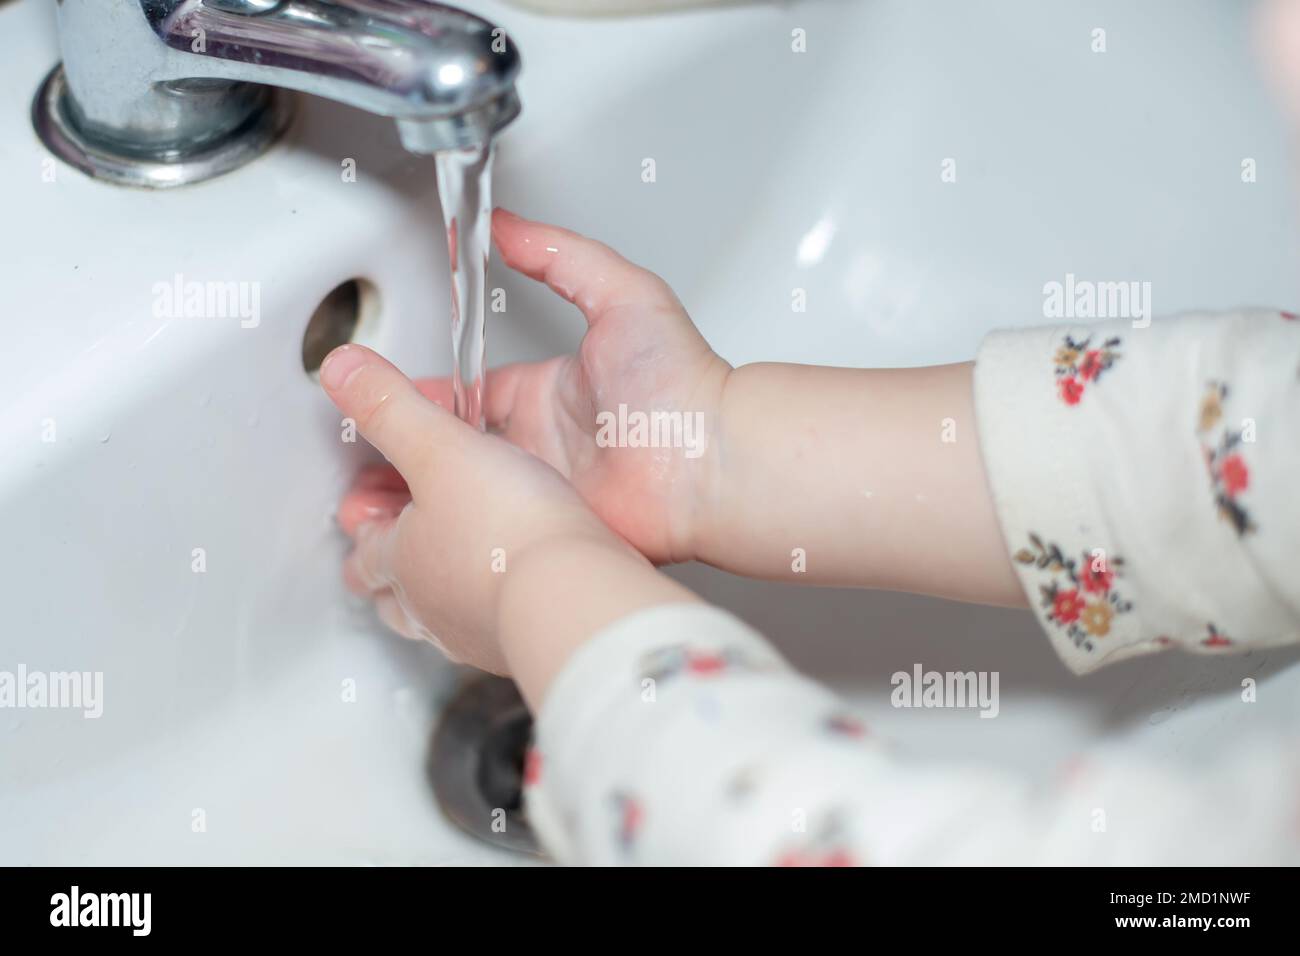 Kid washing hands in white basin. cleaning hand to stop spread of Covid-19, Coronavirus pandemic Stock Photo